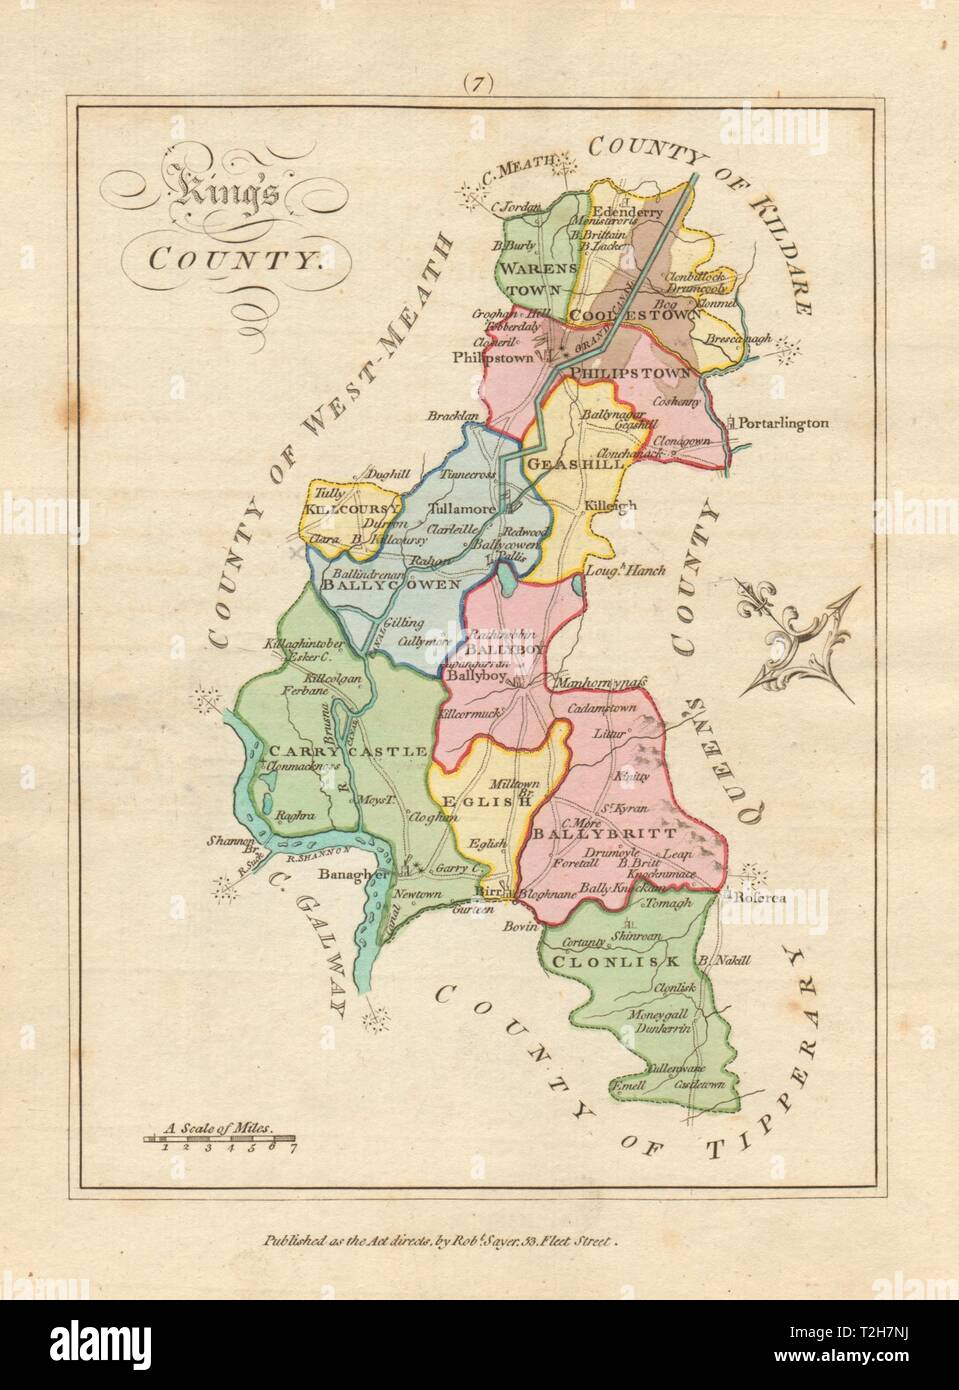 Kings County (Offaly), Leinster. Antique copperplate map. Scalé / Sayer 1788 Stock Photo